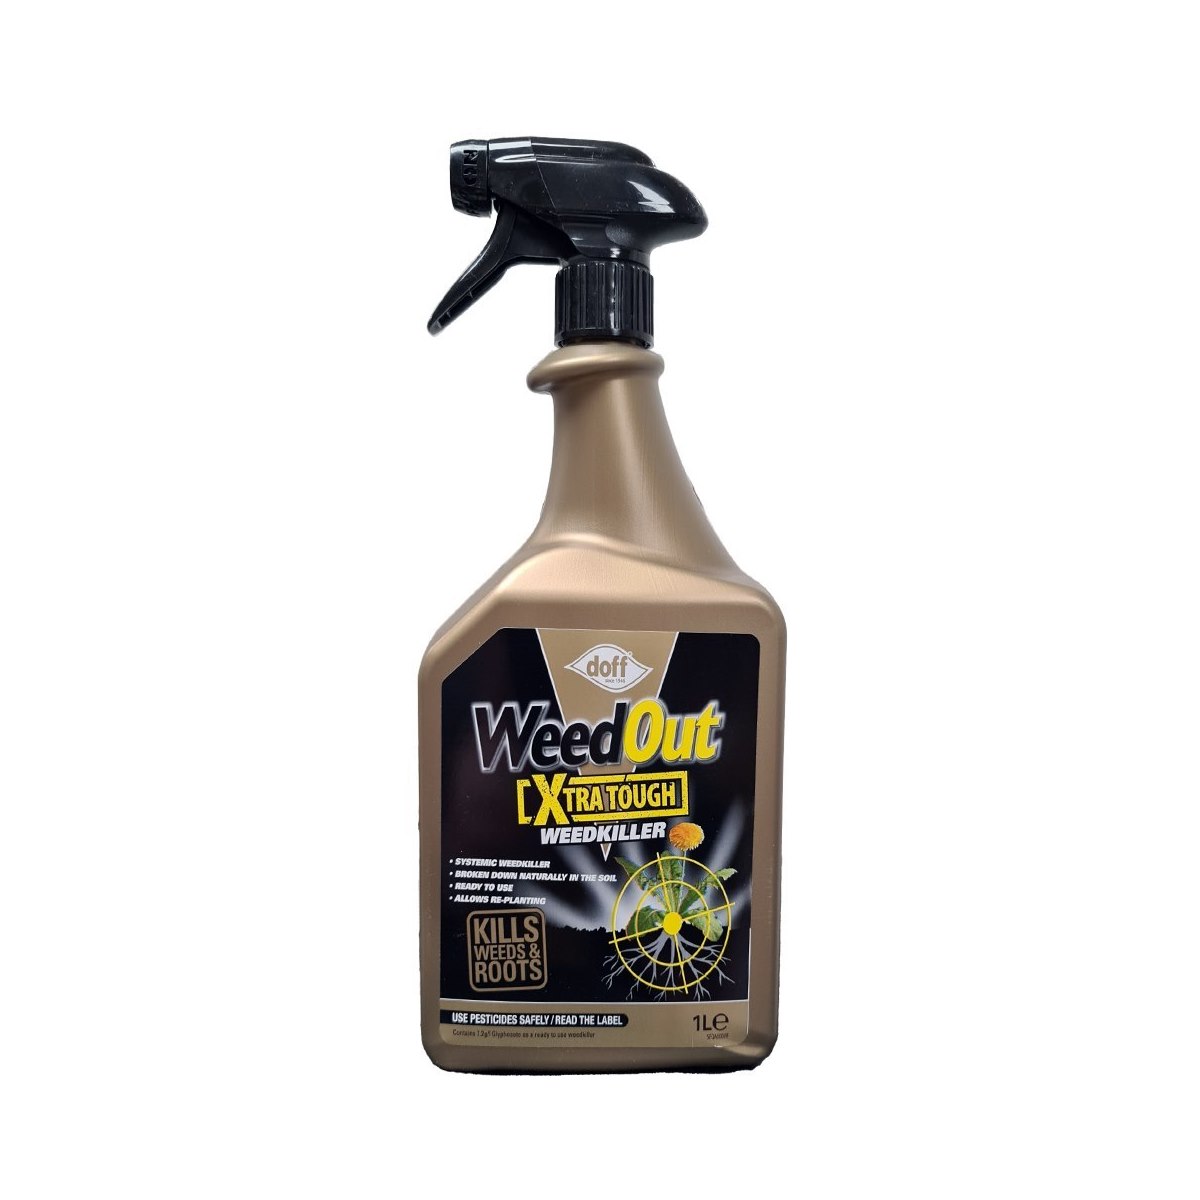 Doff Weedout Extra Tough Weedkiller Ready To Use Trigger Spray